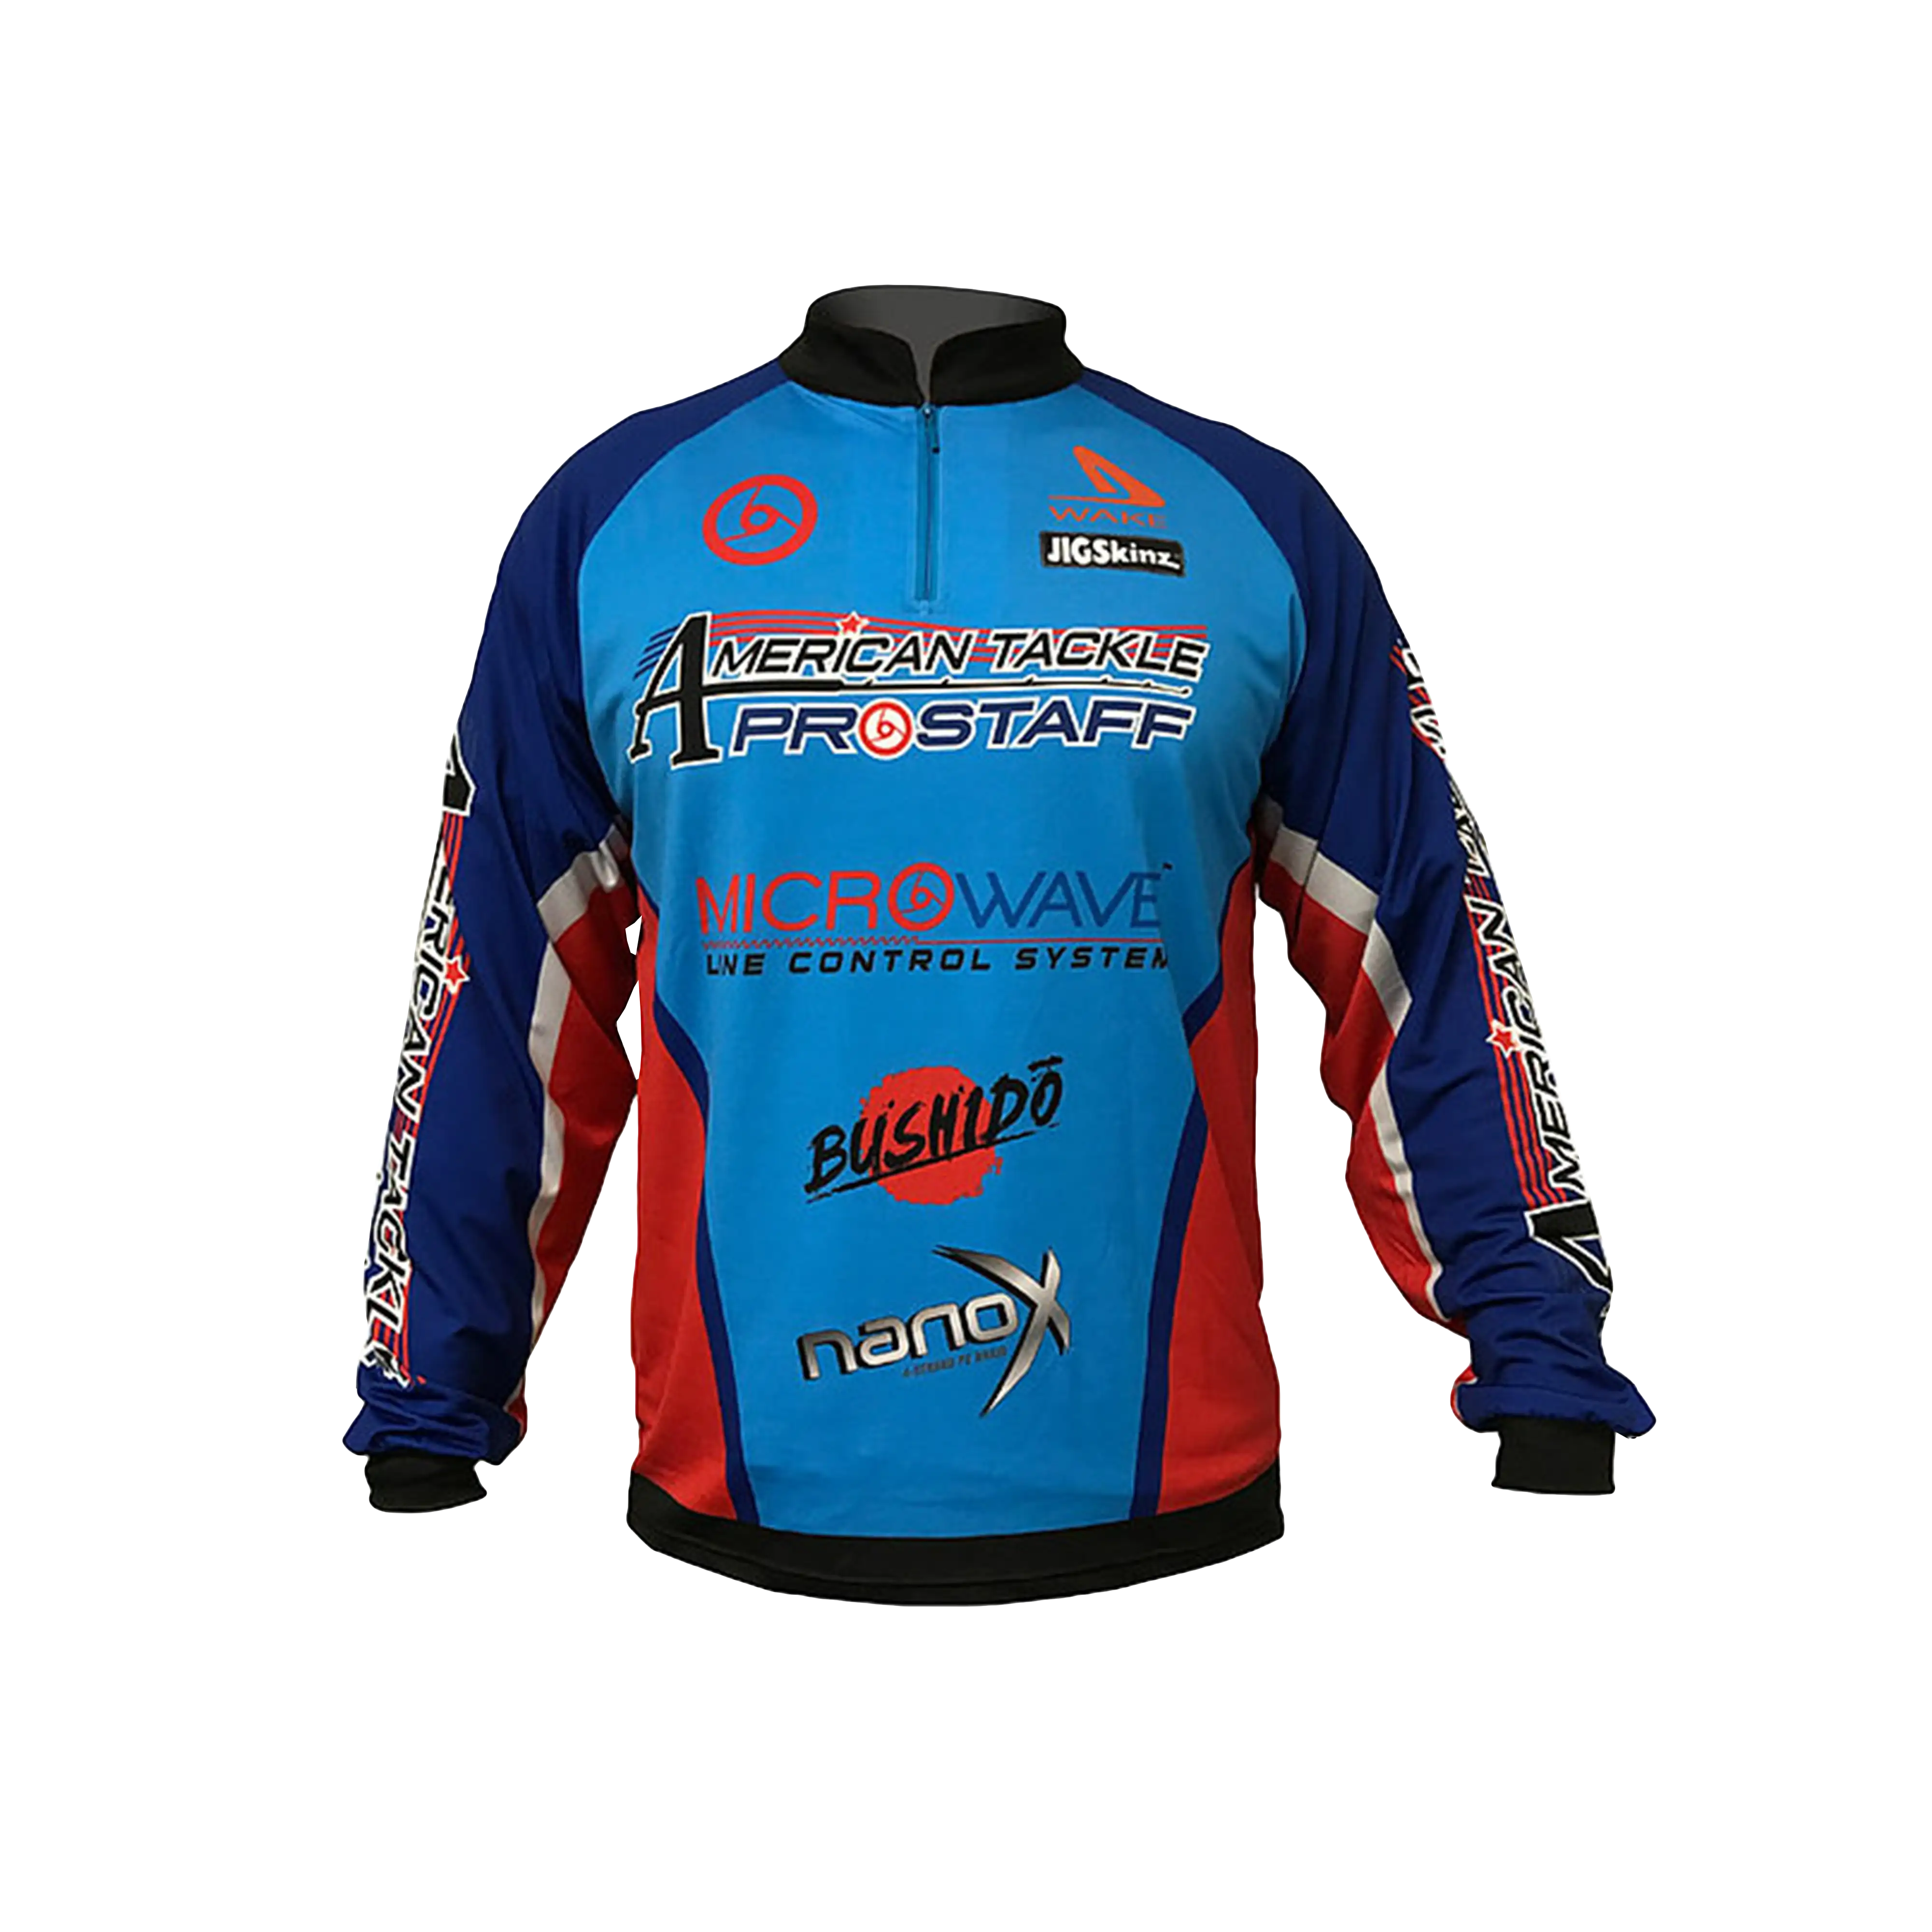 American Tackle ProStaff Jersey - Red, White & Blue